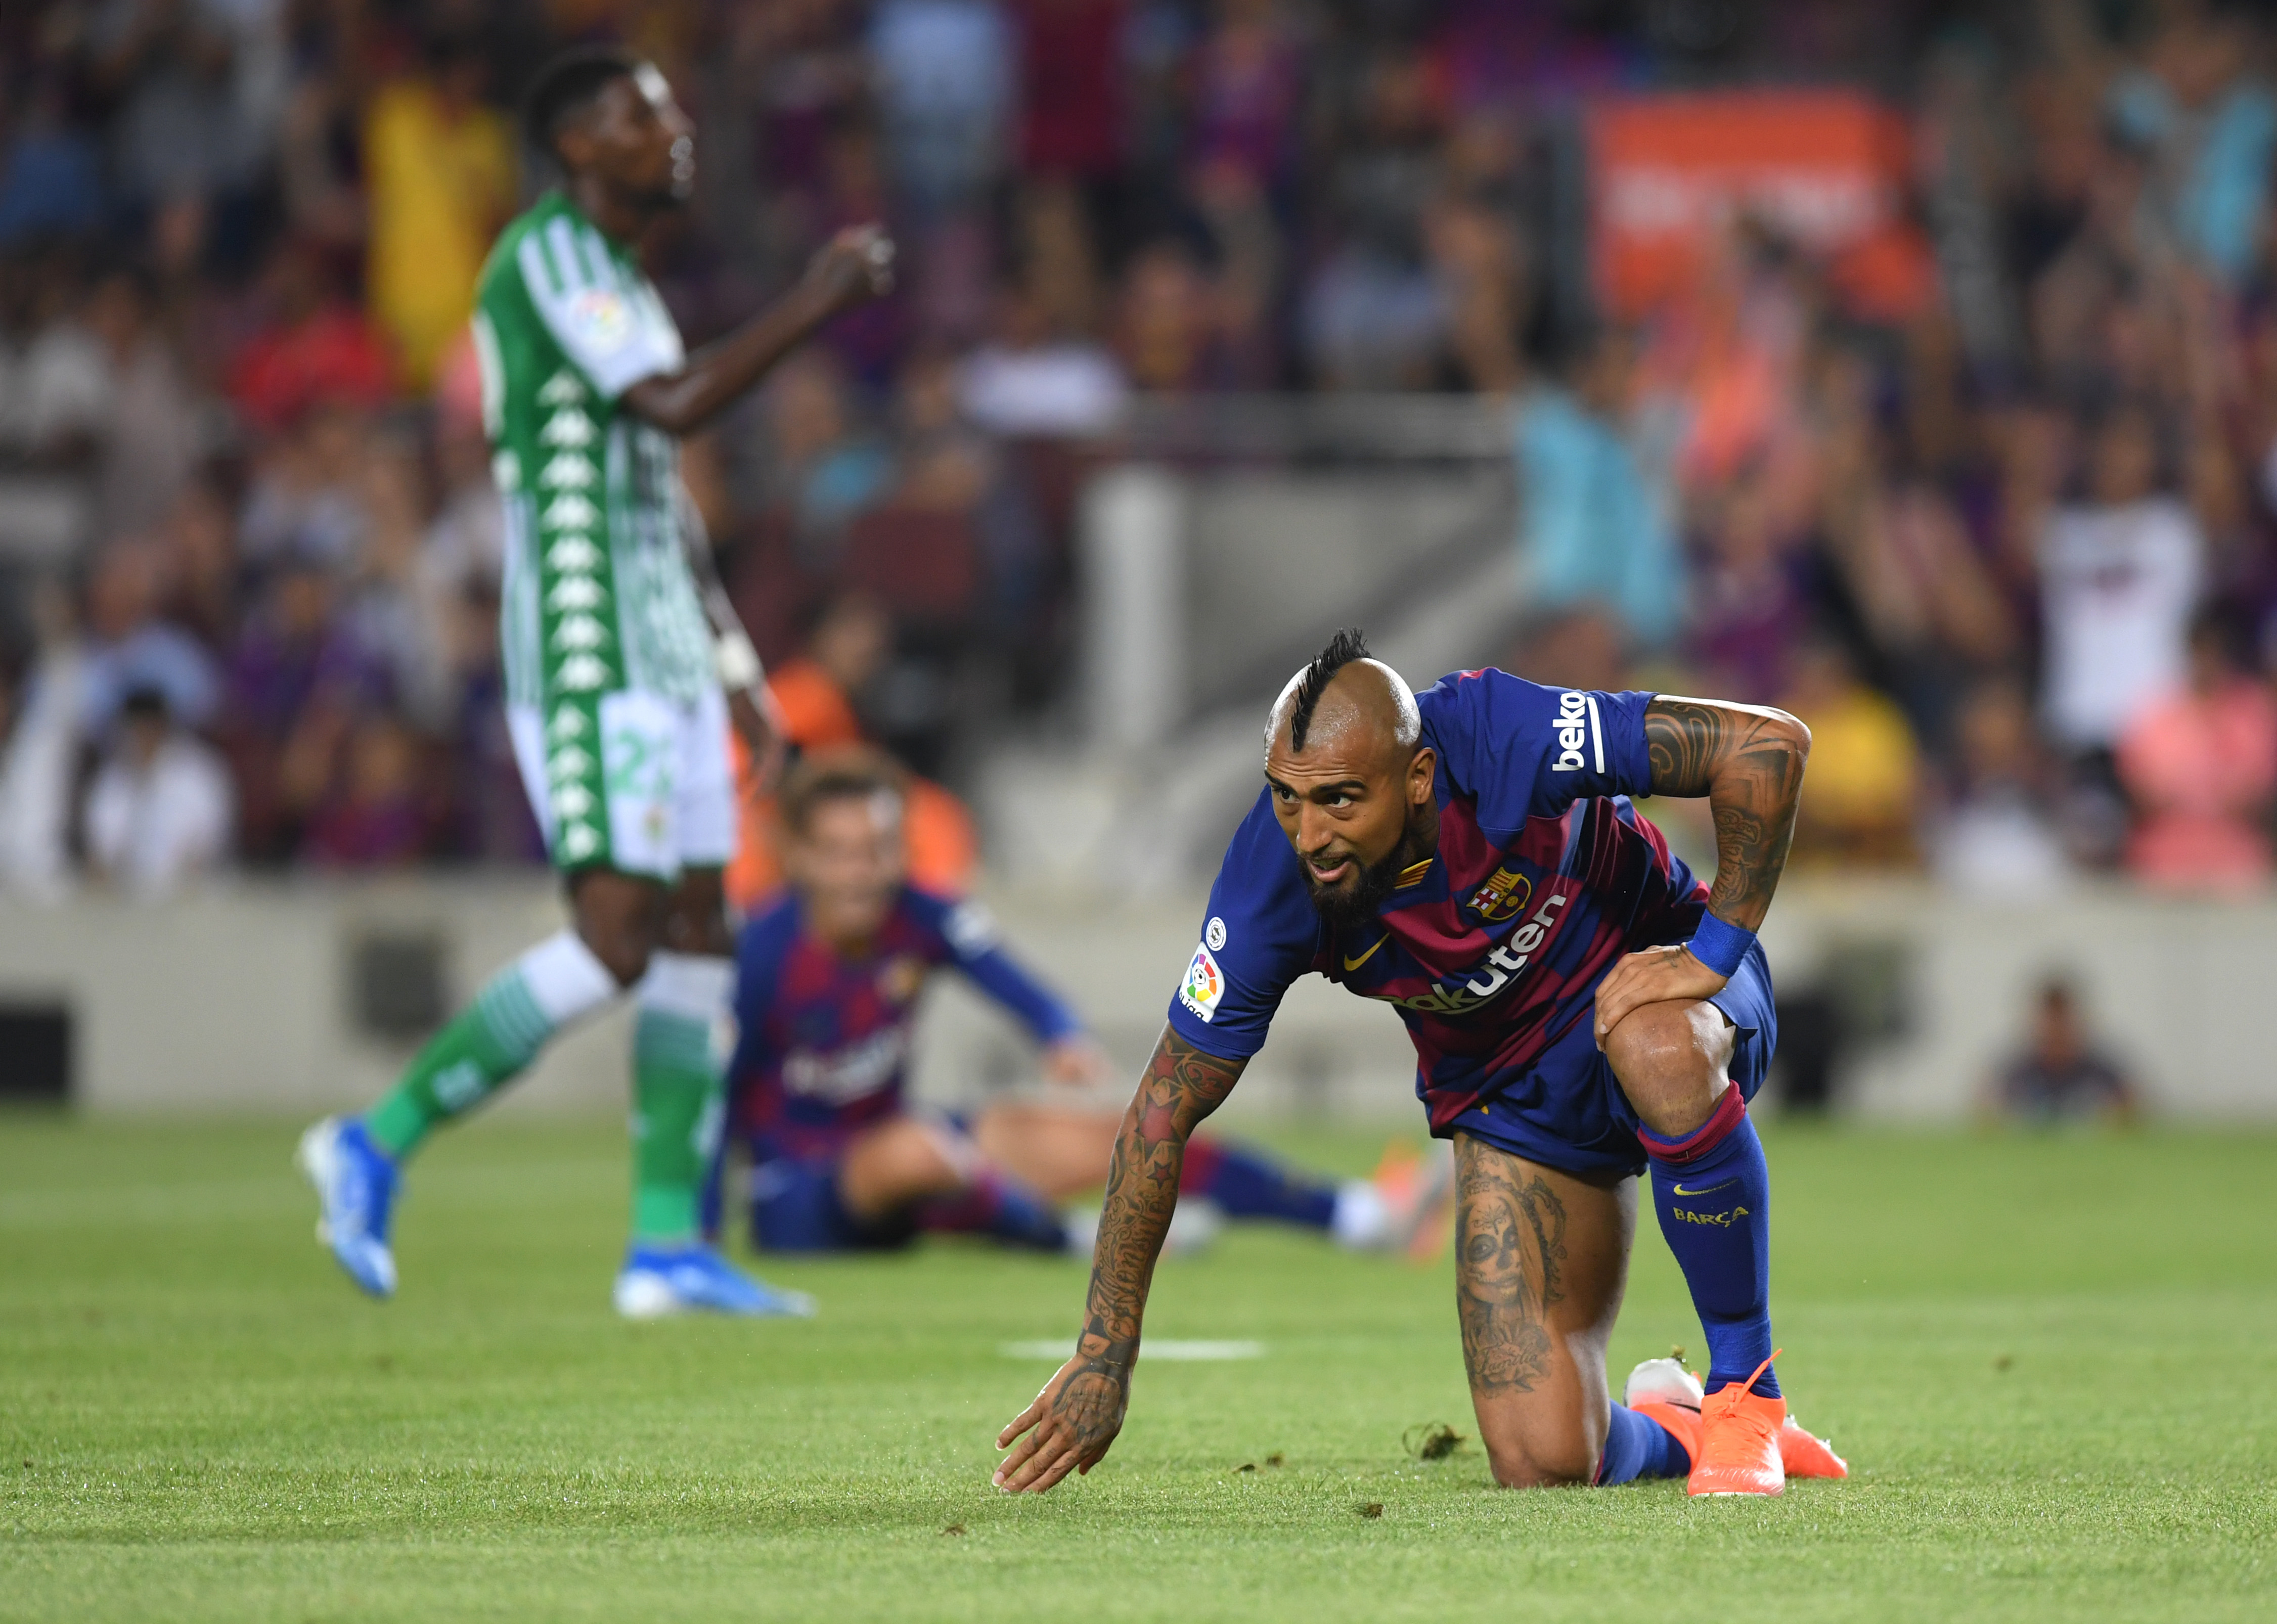 BARCELONA, SPAIN - AUGUST 25: Arturo Vidal of Barcelona celebrates after scoring his team's fifth goal during the Liga match between FC Barcelona and Real Betis at Camp Nou on August 25, 2019 in Barcelona, Spain. (Photo by Alex Caparros/Getty Images)